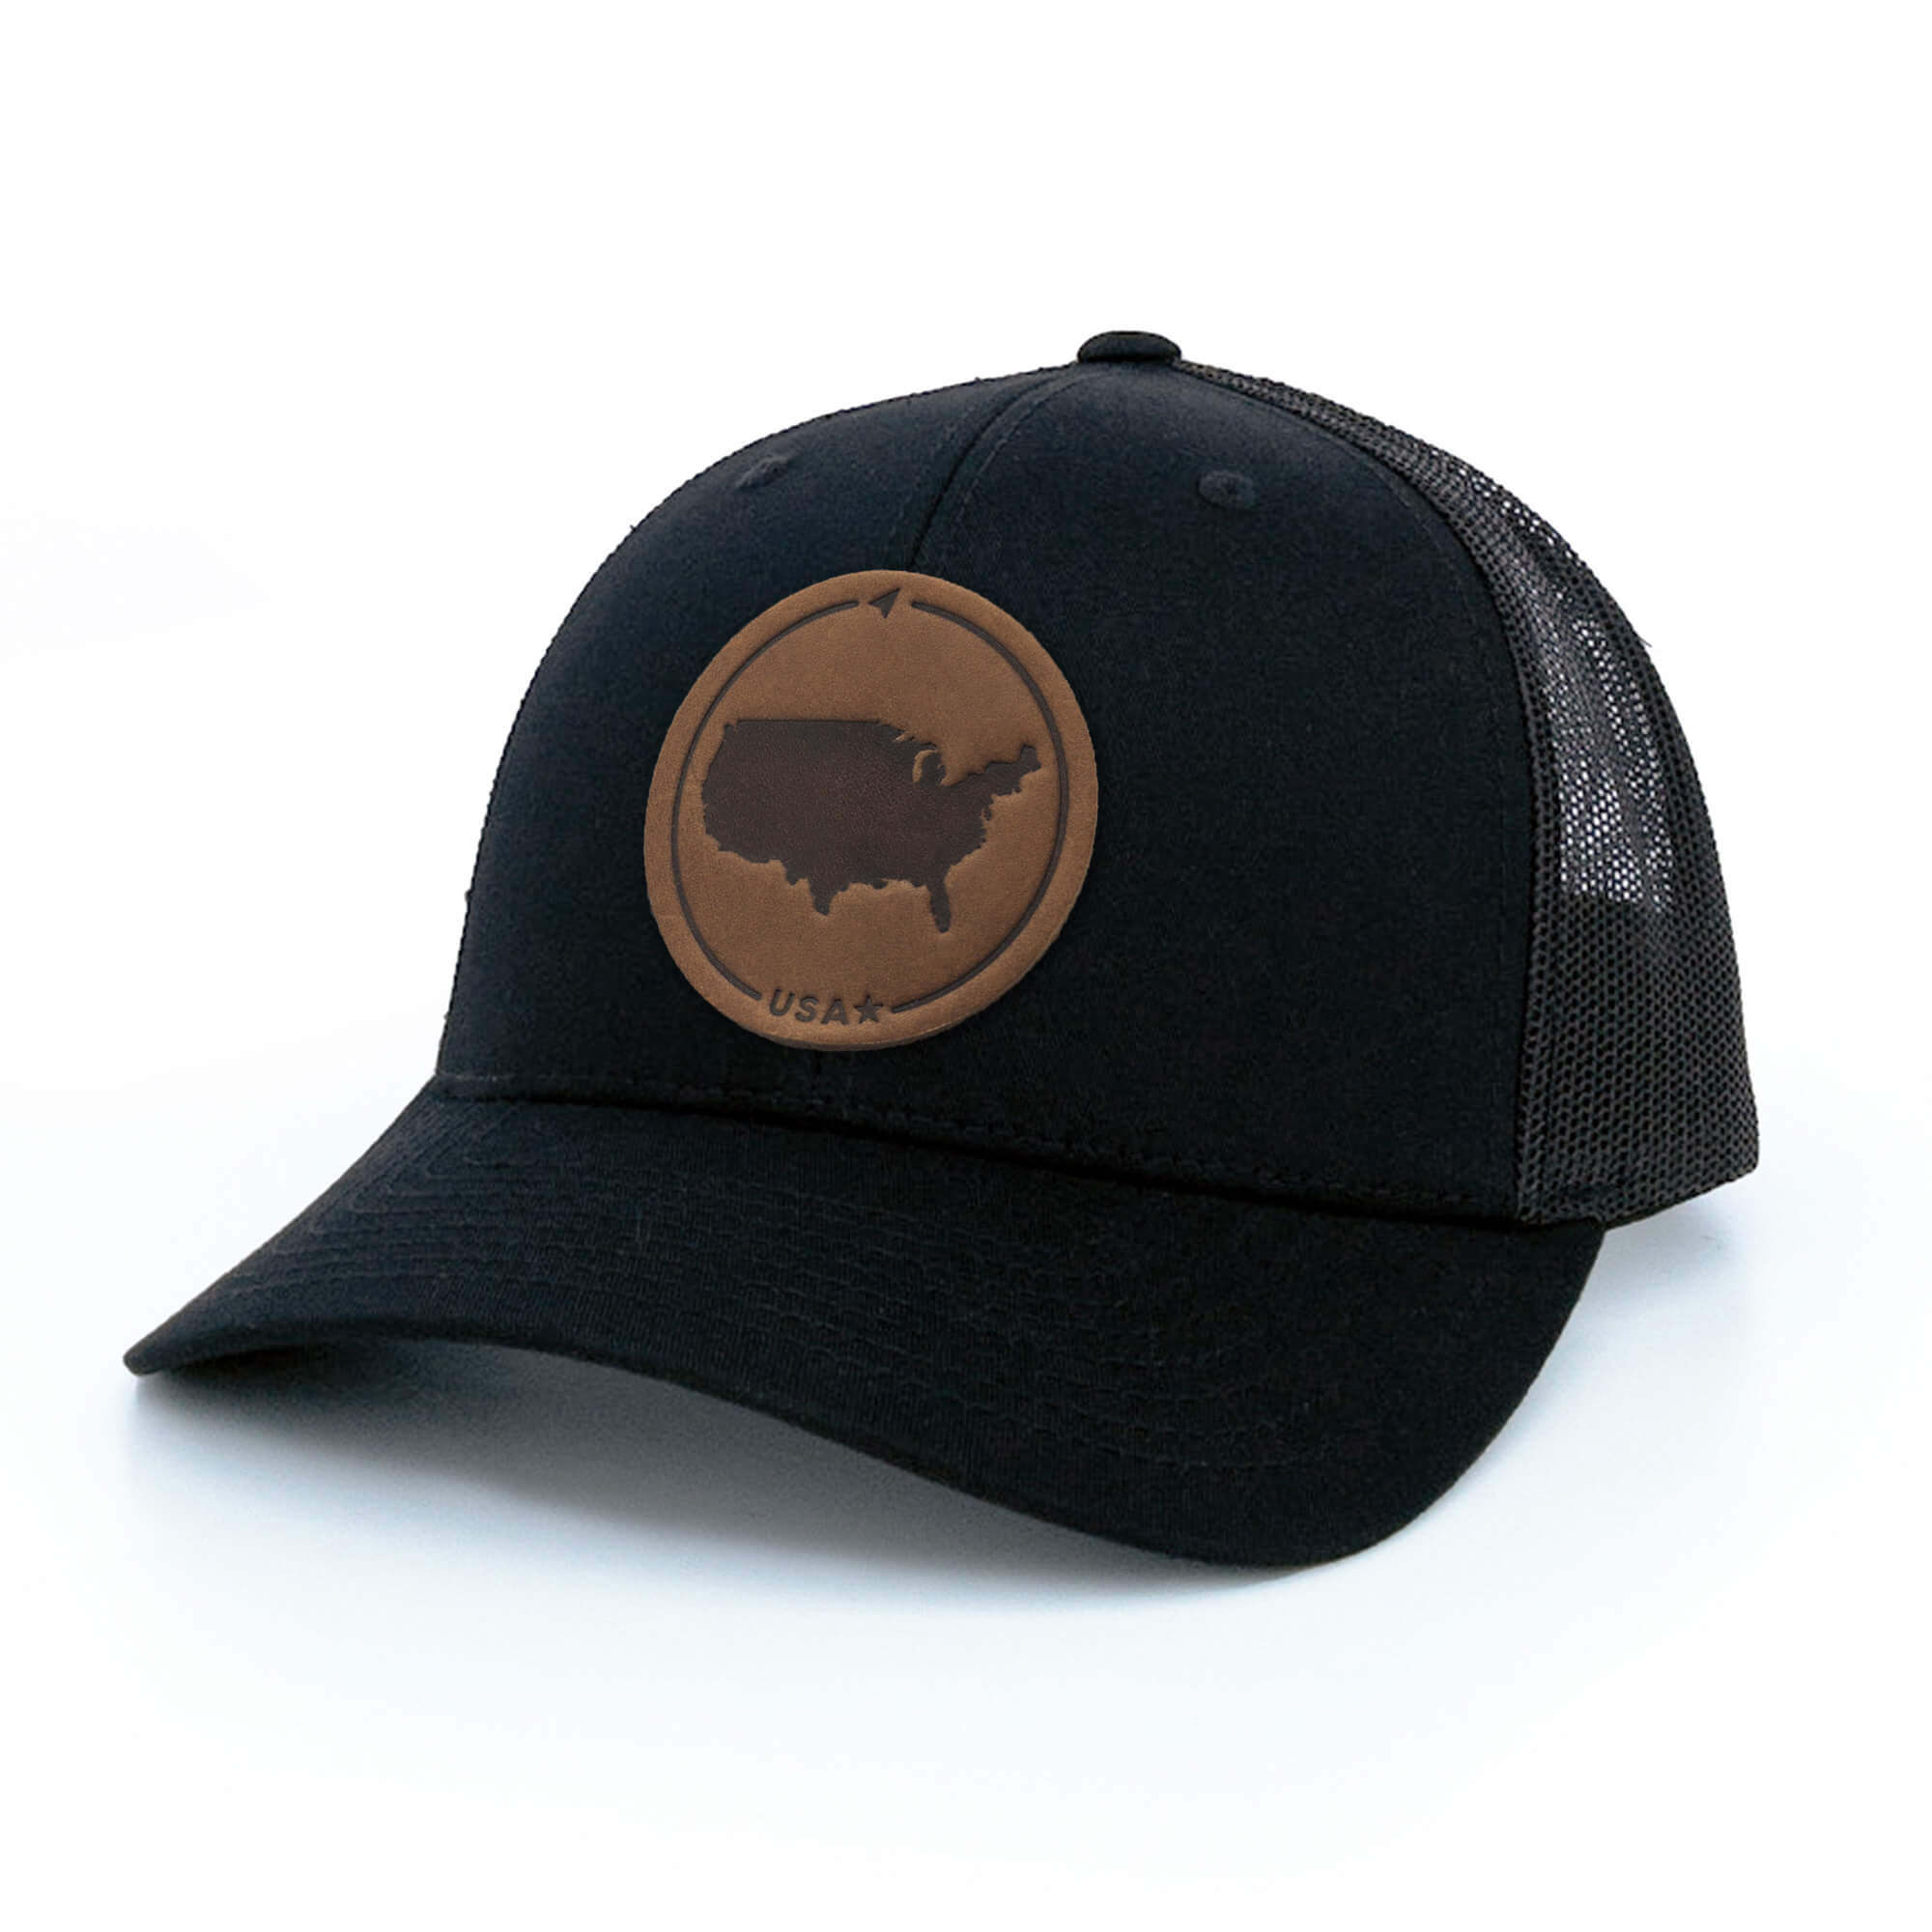 Black trucker hat with full-grain leather patch of USA | BLACK-003-001, CHARC-003-001, NAVY-003-001, HGREY-003-001, MOSS-003-001, BROWN-003-001